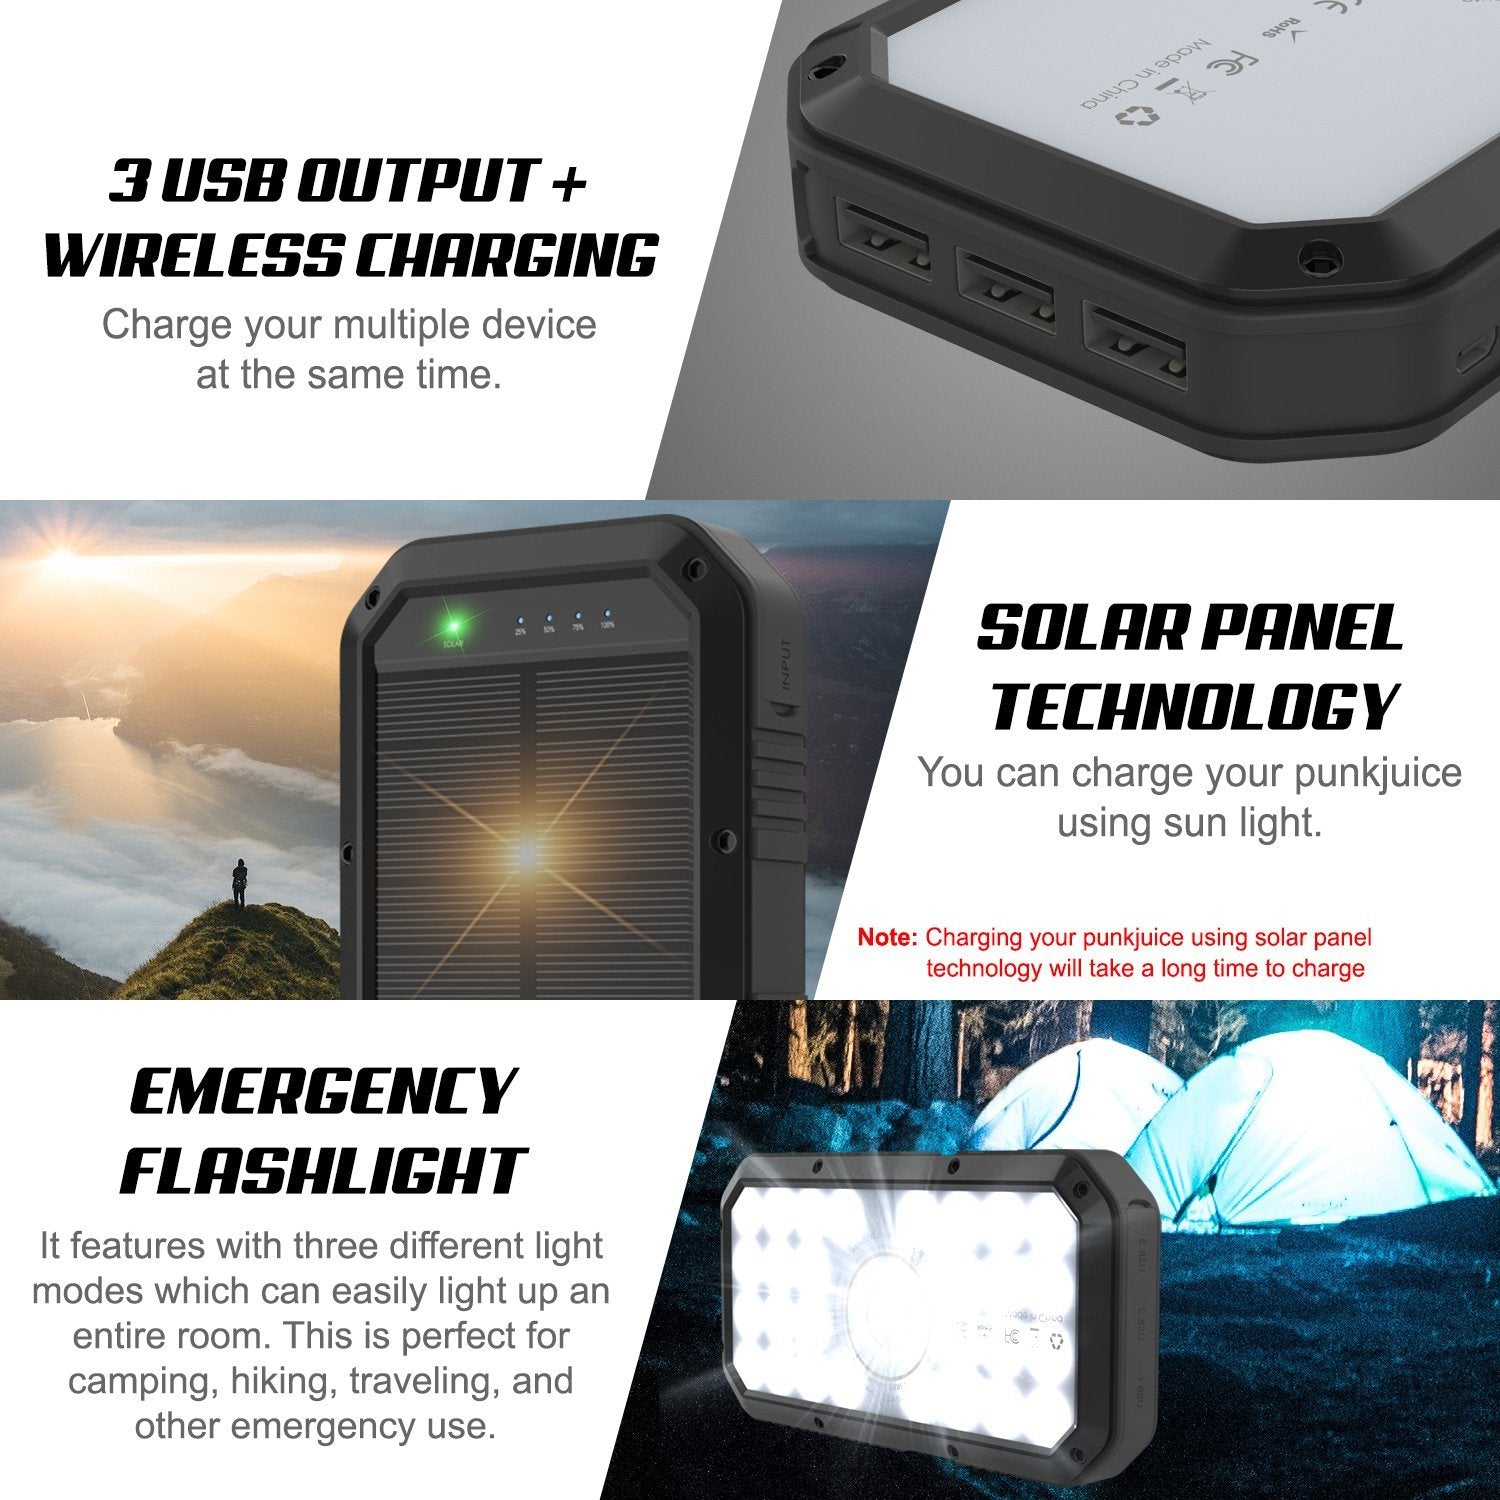 PunkCase Solar Wireless PowerBank 20000mah Battery Pack for iPhone X/XS/Max/XR / 11/10, iPad, Samsung Galaxy S10 / S9 and Many More [Black]